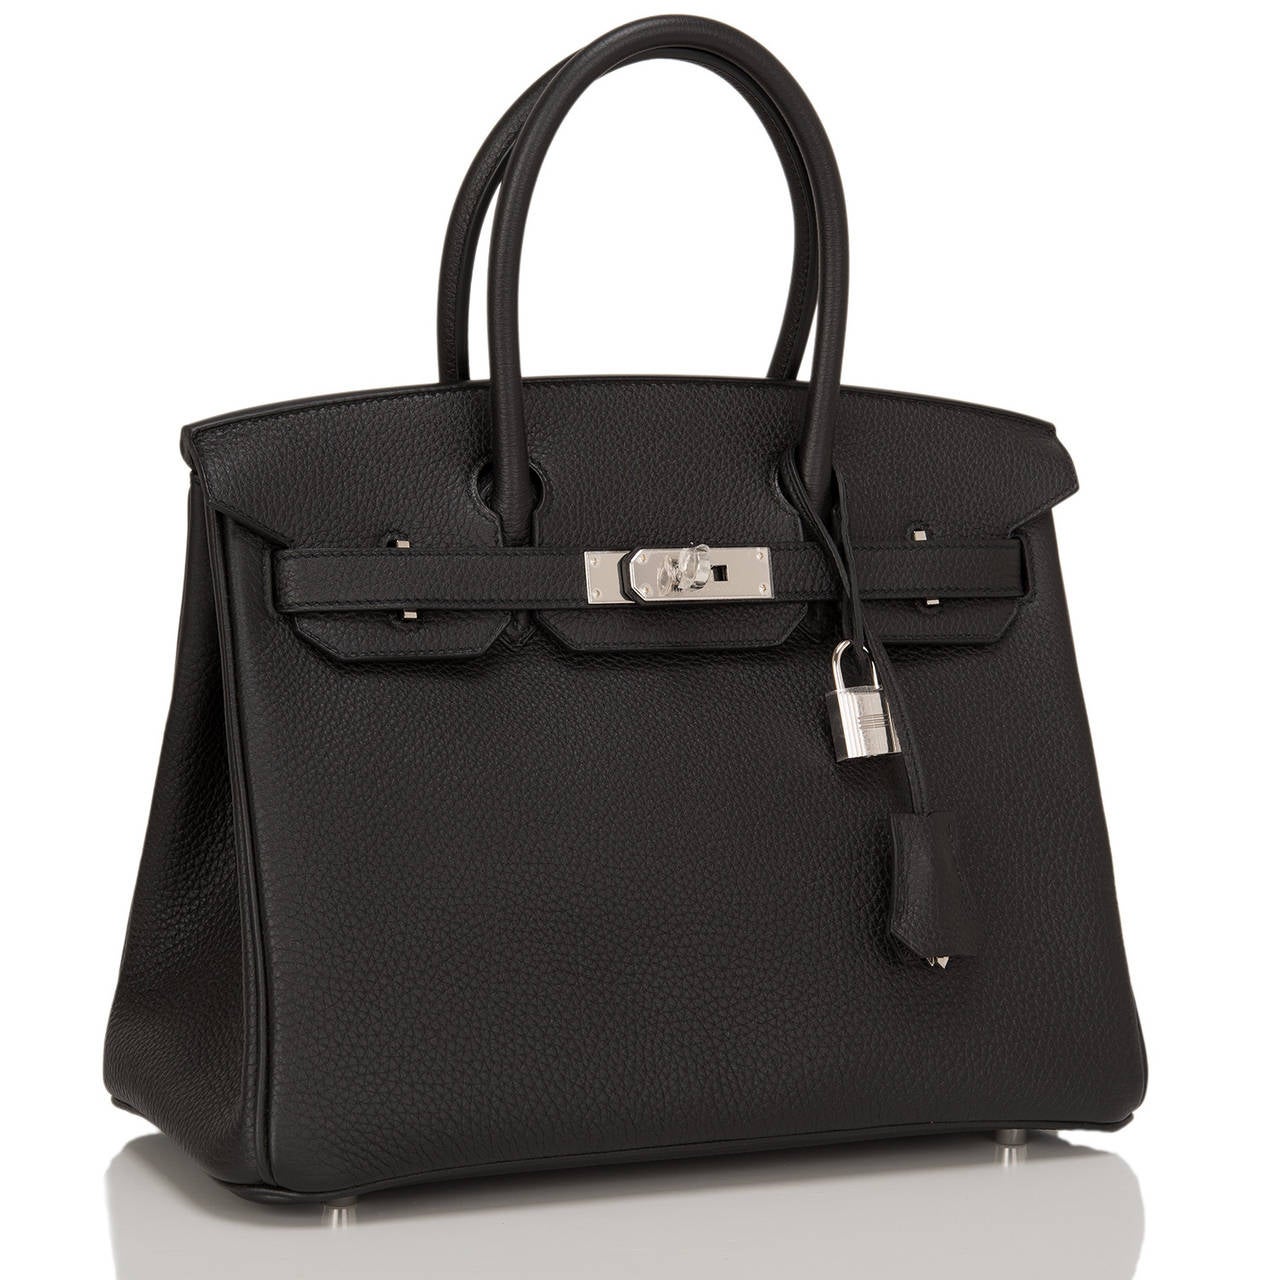 Hermes Black Birkin 30cm in togo (bull) leather with palladium hardware.

This style features tonal stitching, front toggle closure, clochette with lock and two keys, and double rolled handles. The interior is lined in black chevre with one zip